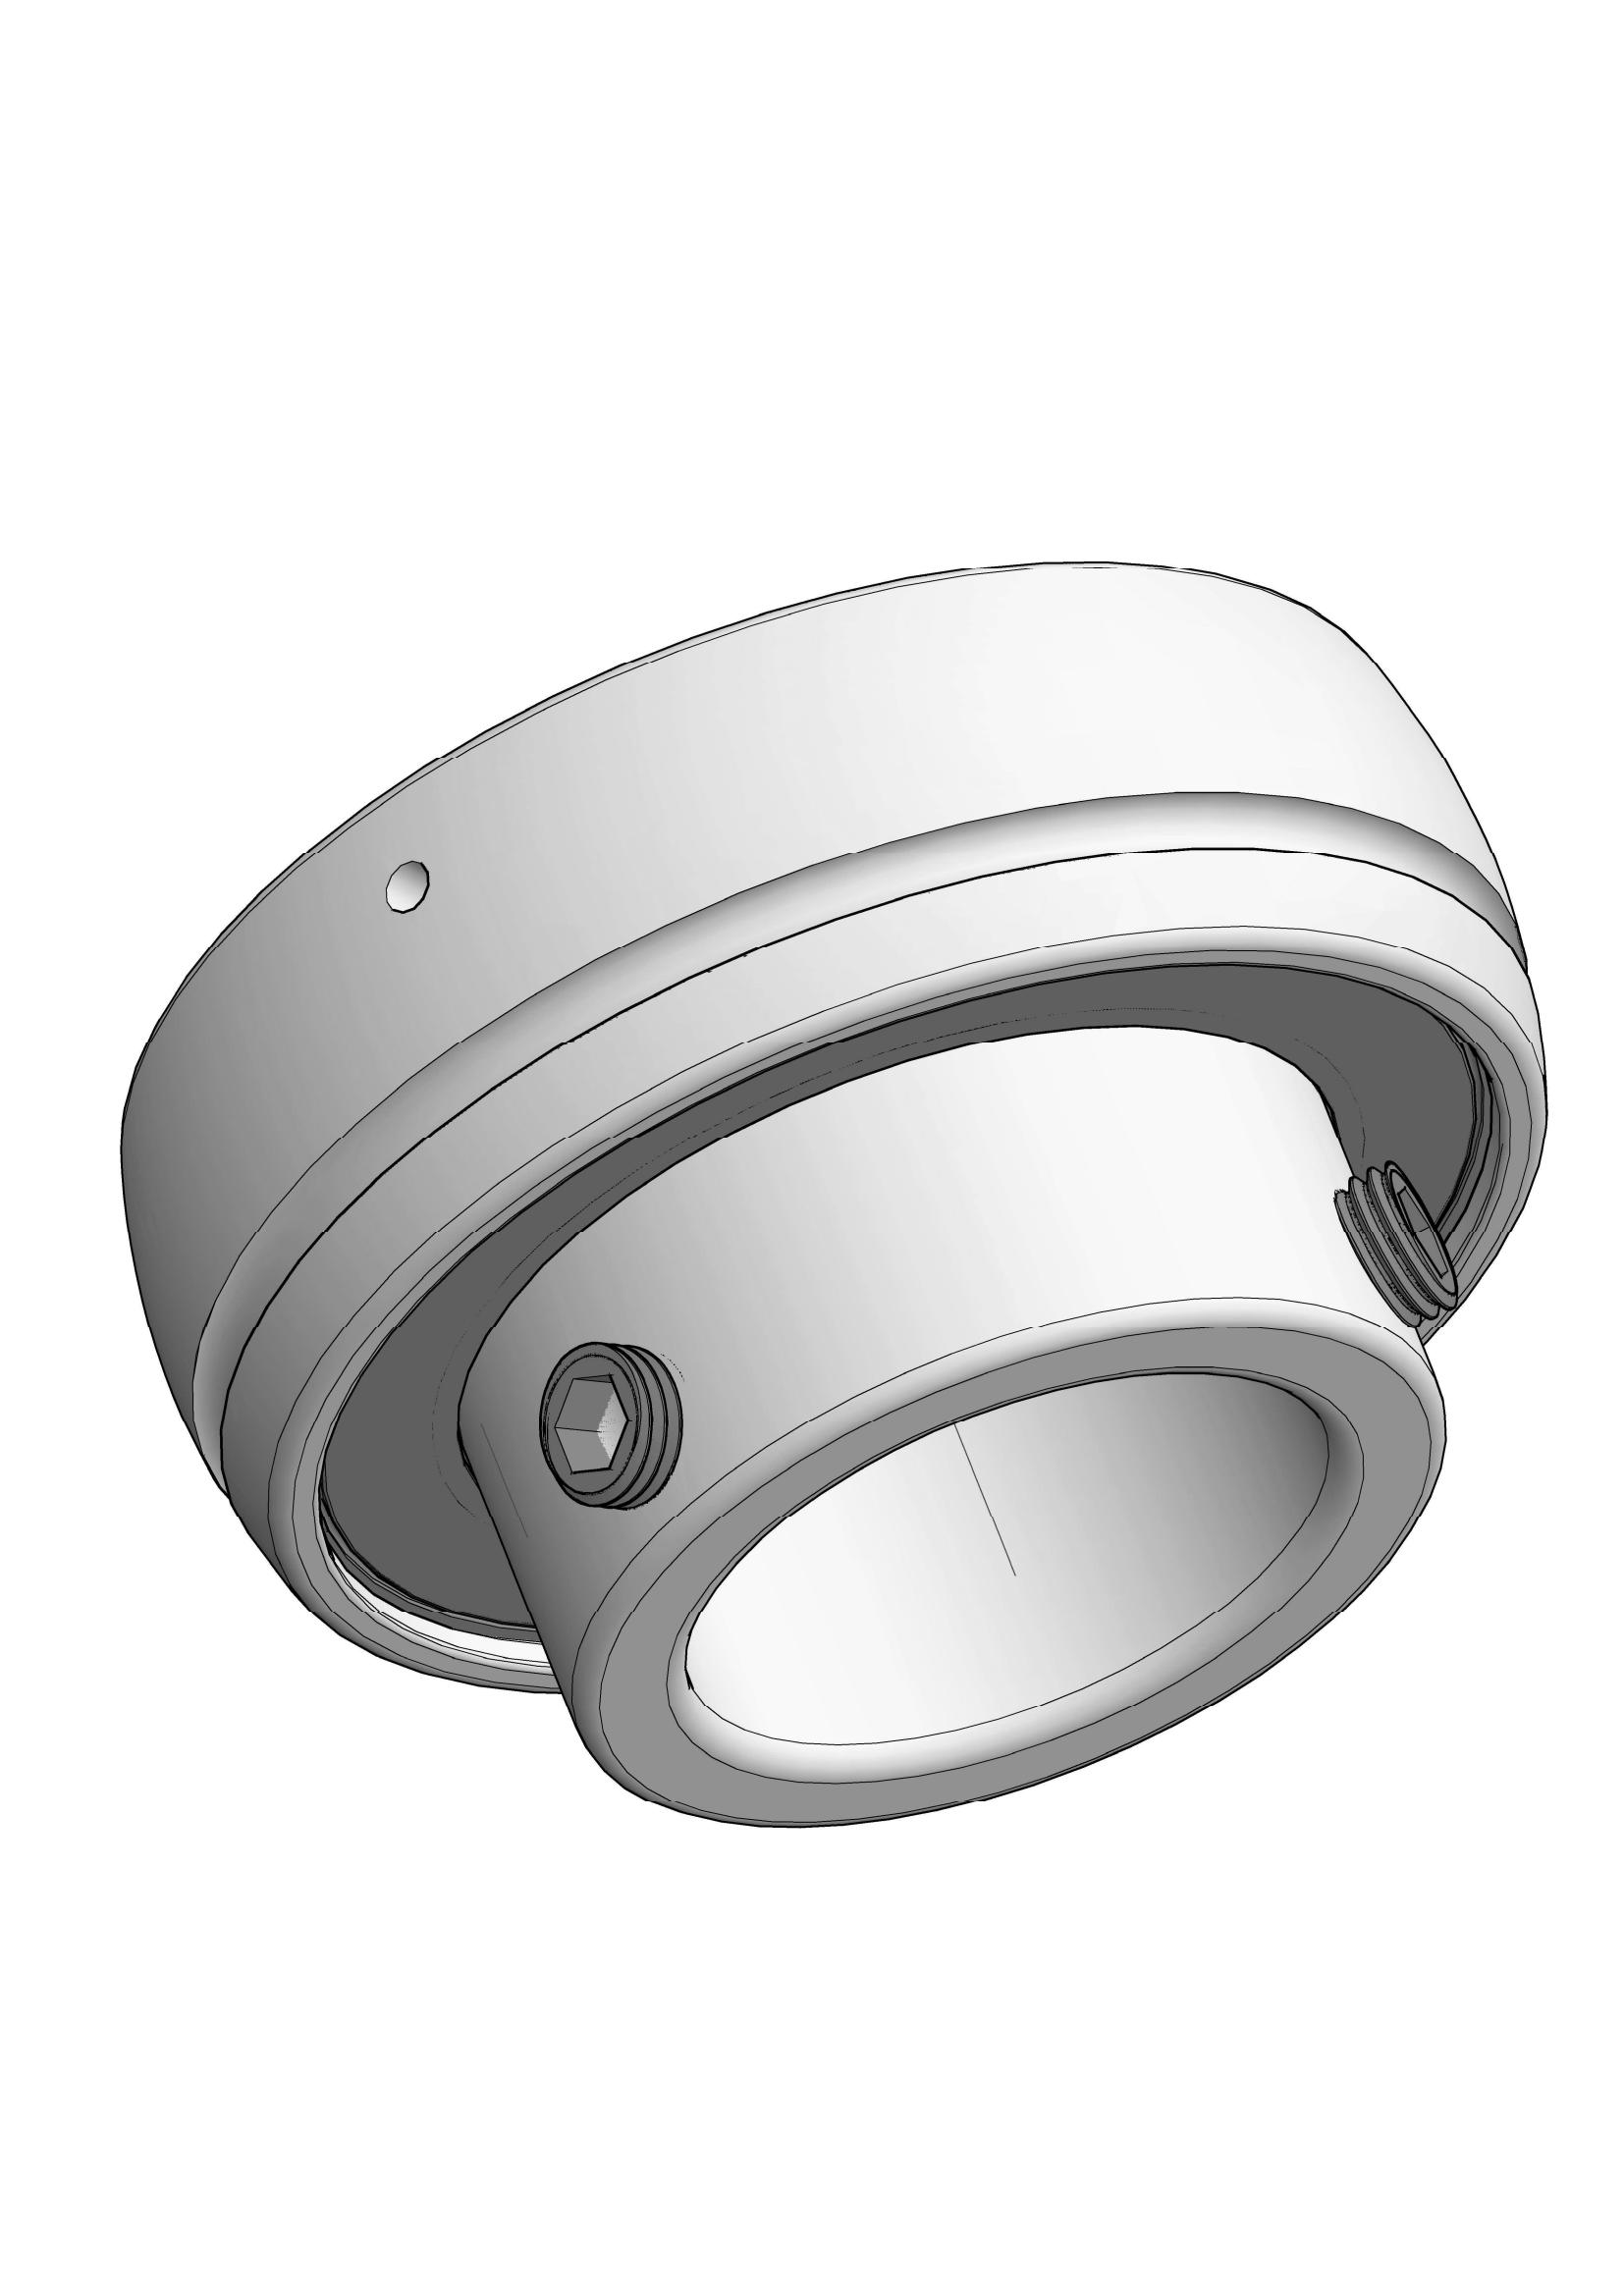 SB212-36 insert ball bearings with Eccentric Collar Lock with 2-1/4 inch Bore